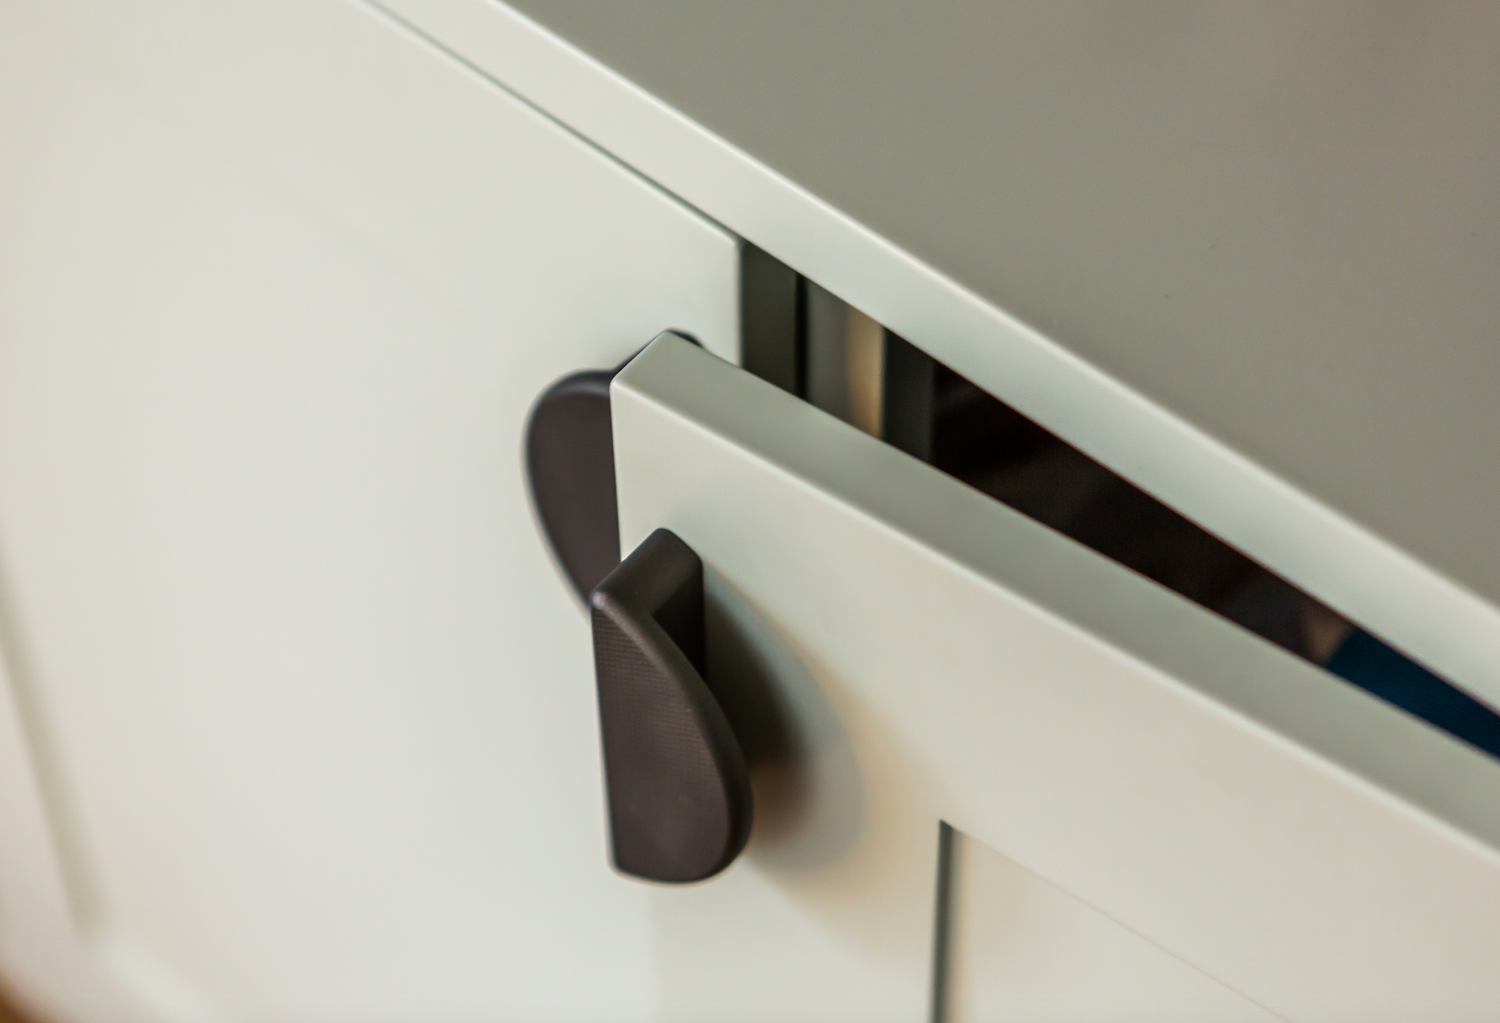 crescent shaped half moon handle in cerakote midnight bronze with knurl detail on white shaker cabinetry doors